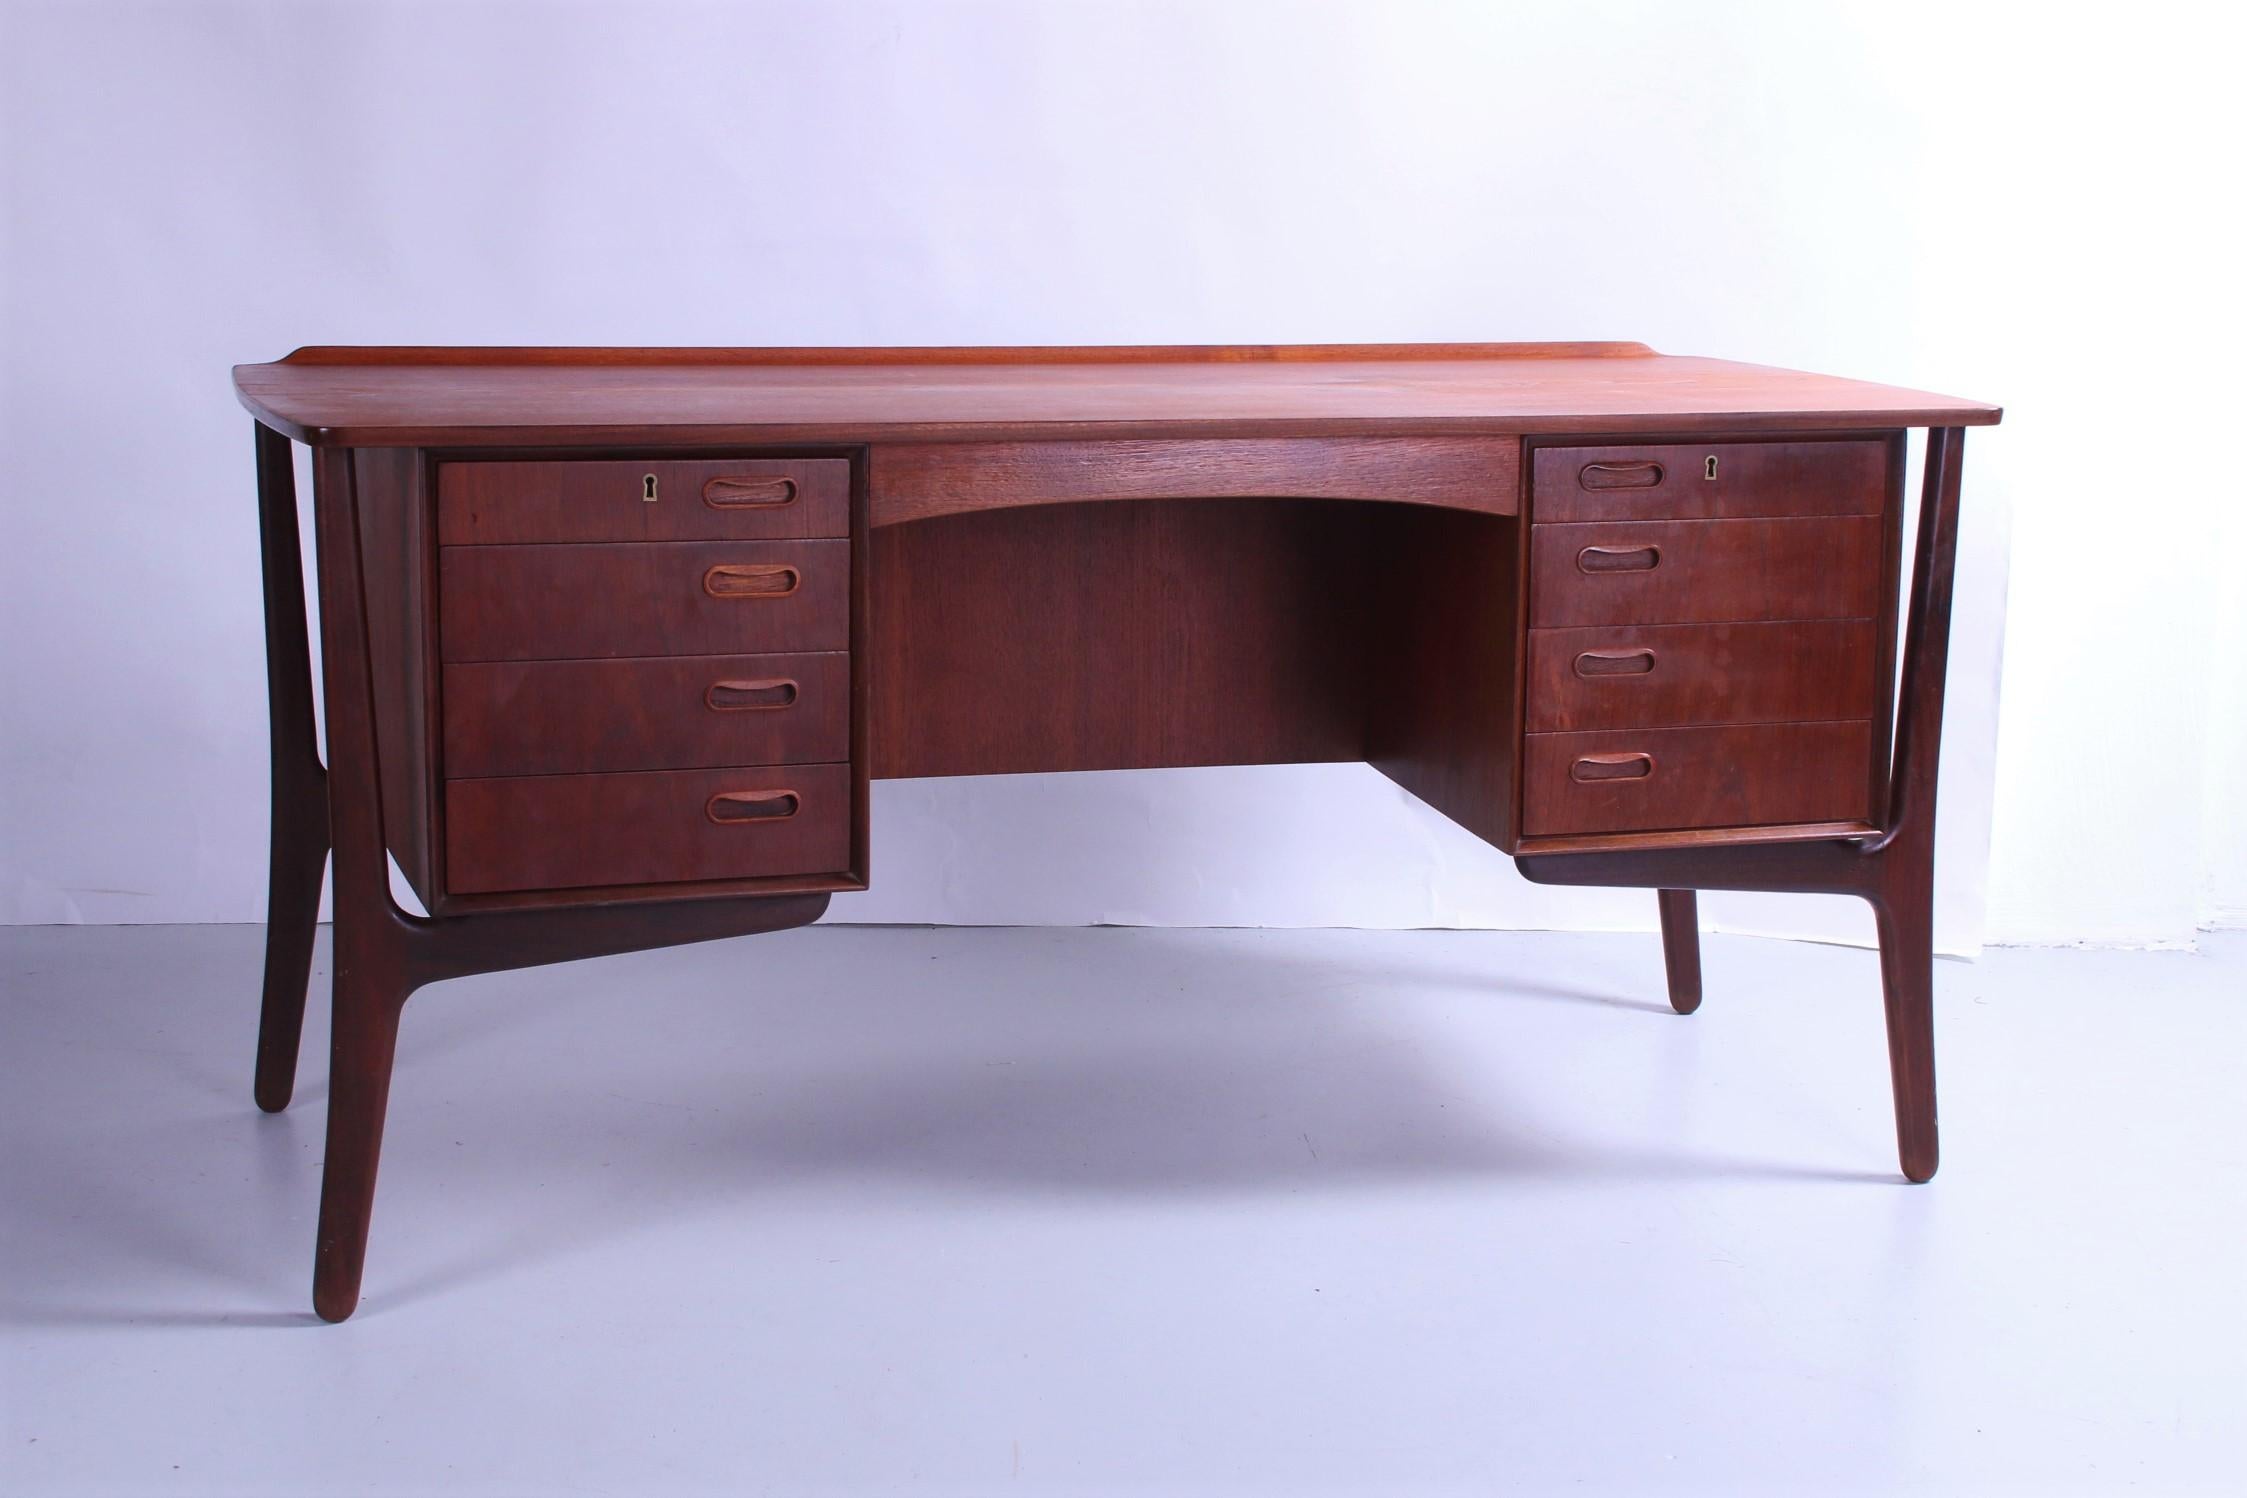 This vintage desk is a Design by Svend Aage Madsen,

and made by HP Hansen and is made of teak,

in the 60's by and has a beautiful wooden top with drawers underneath, two with lock.

The legs under this desk are very smoothly finished.

The